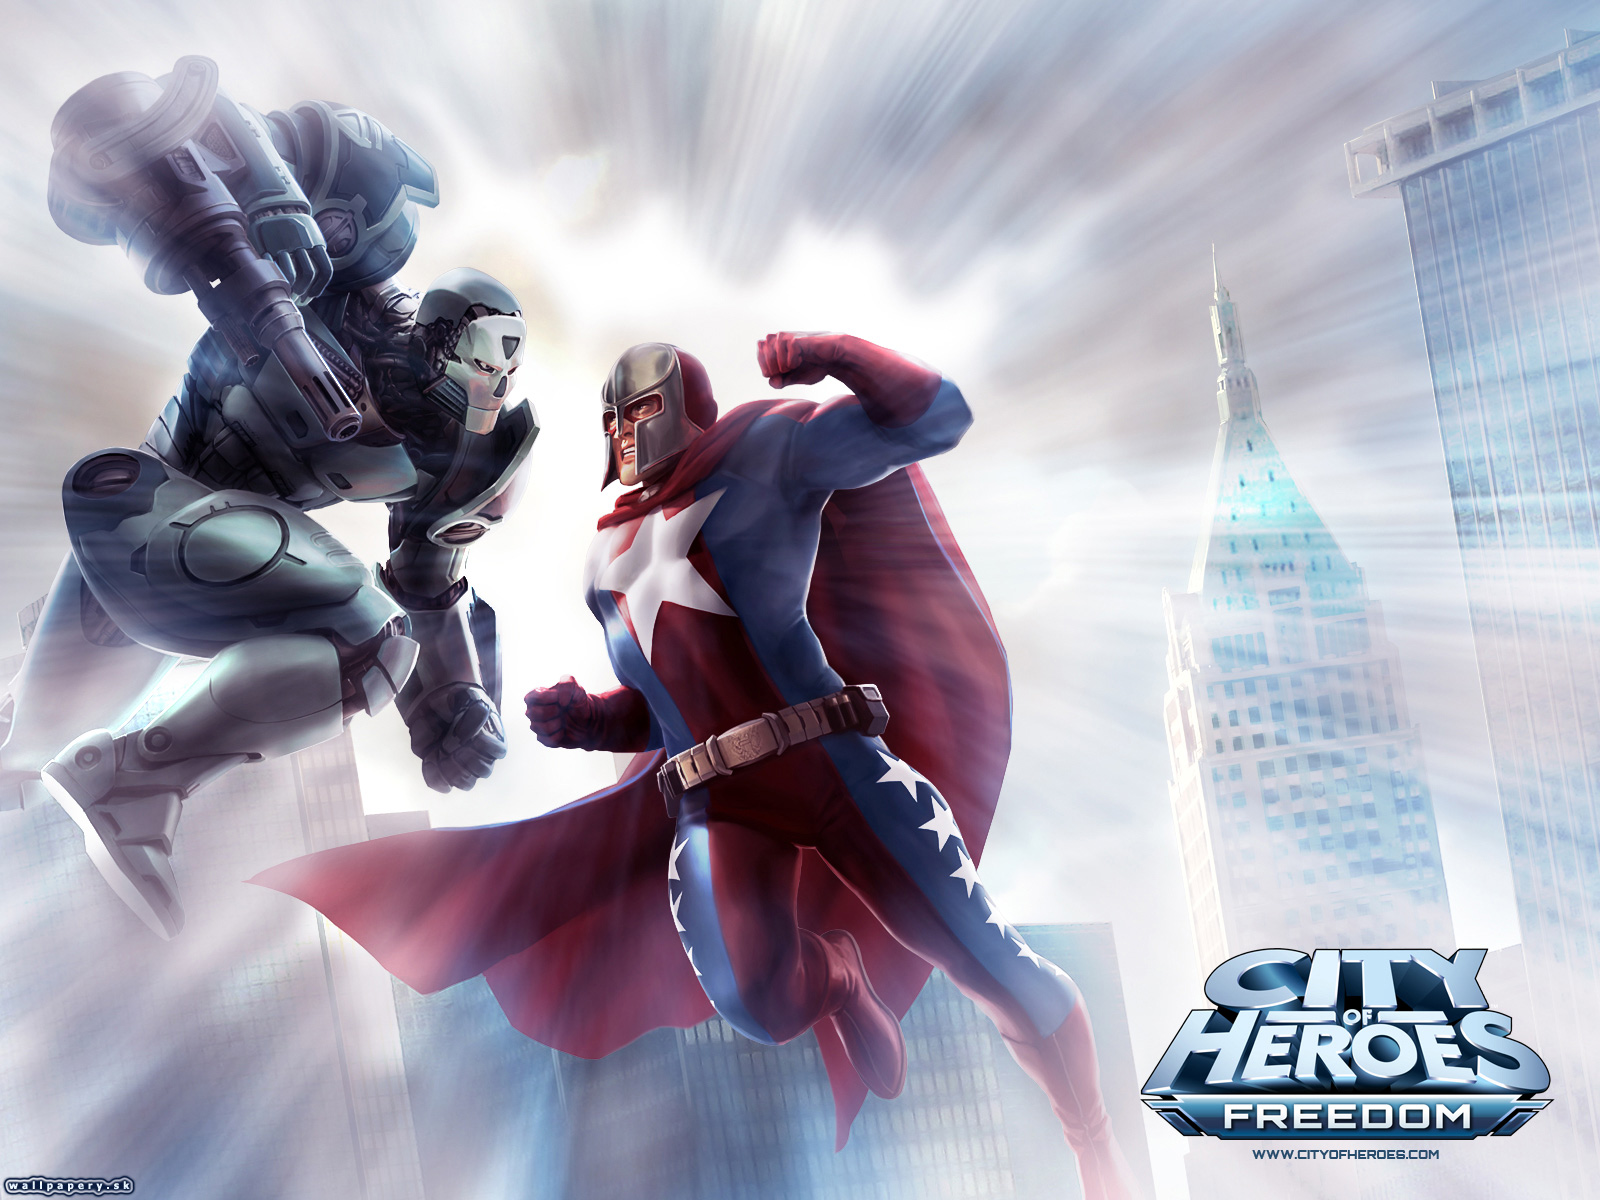 City of Heroes: Freedom - wallpaper 3